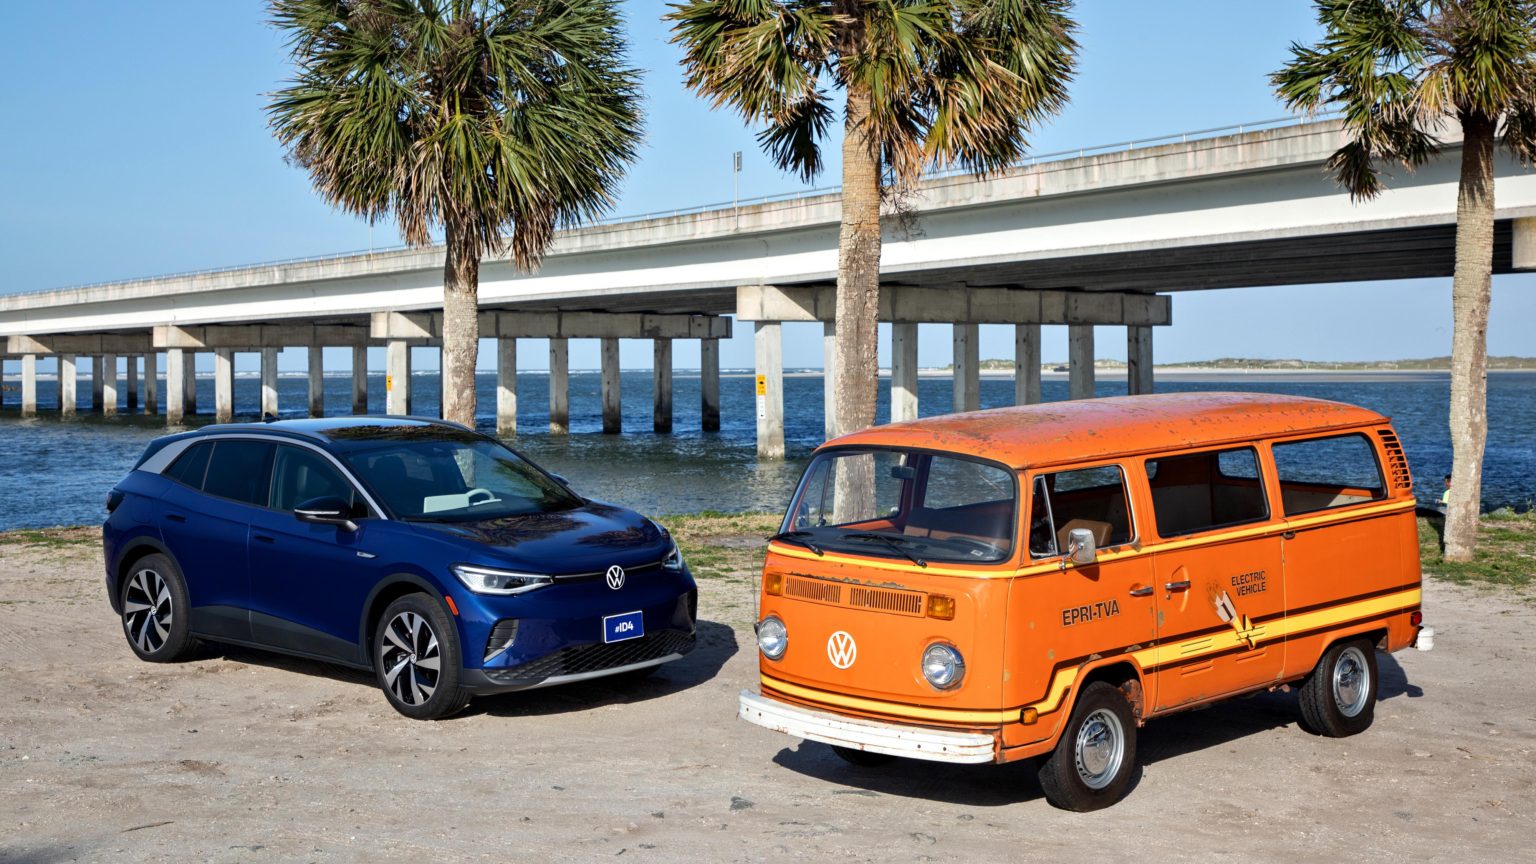 Two Volkswagen electric vehicles hang out side-by-side in Florida.